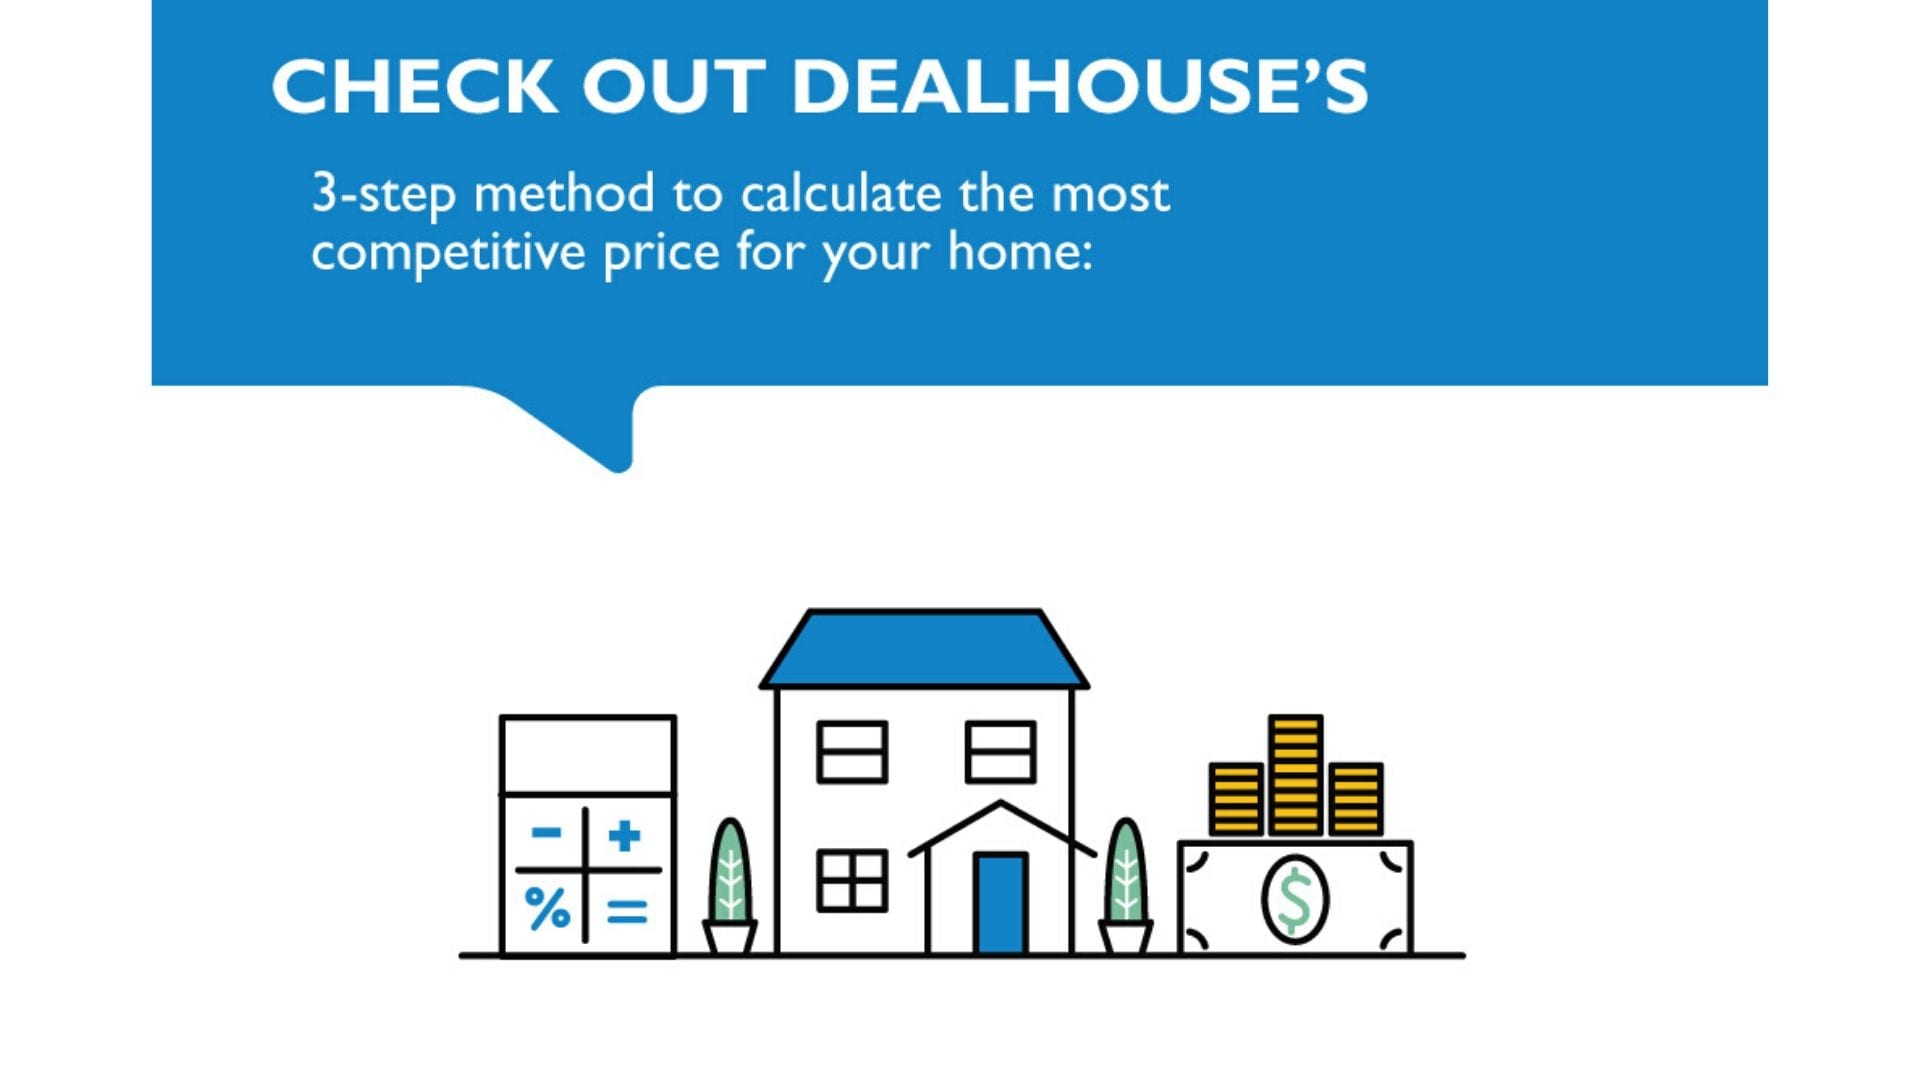 Checkout DealHouse’s 3-Step Method To Calculate The Most Competitive Price For Your Home